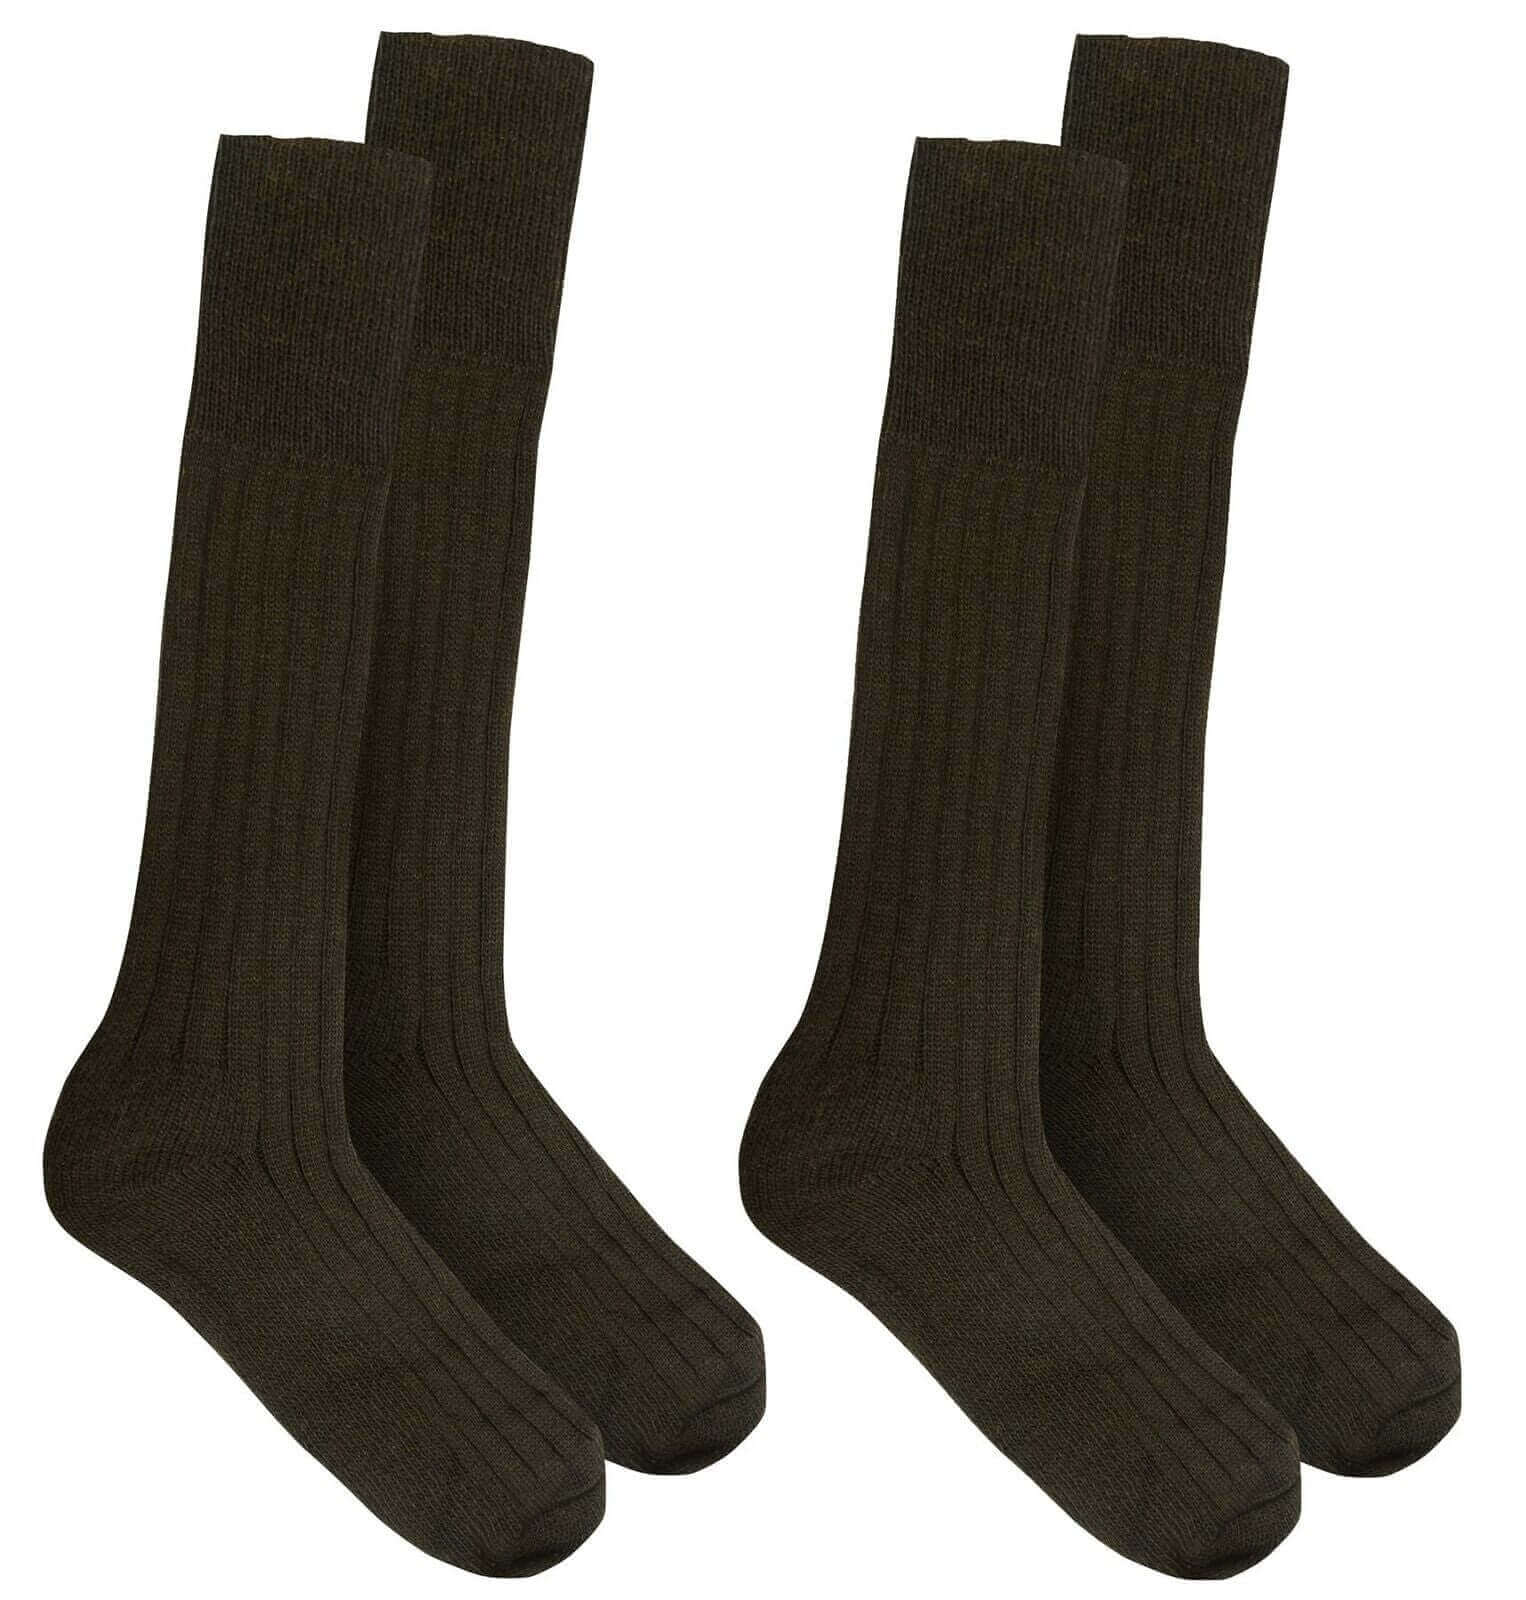 Pack Of 2 Men's Military Socks Heavy Duty Thermal Winter Boot Socks. Buy now for £7.00. A Socks by Sock Stack. 6-11, army, athletics, black, boot, boys, comfortable, green, heavy duty, hiking, mens, mens socks, military, running, socks, sports, thermal, t